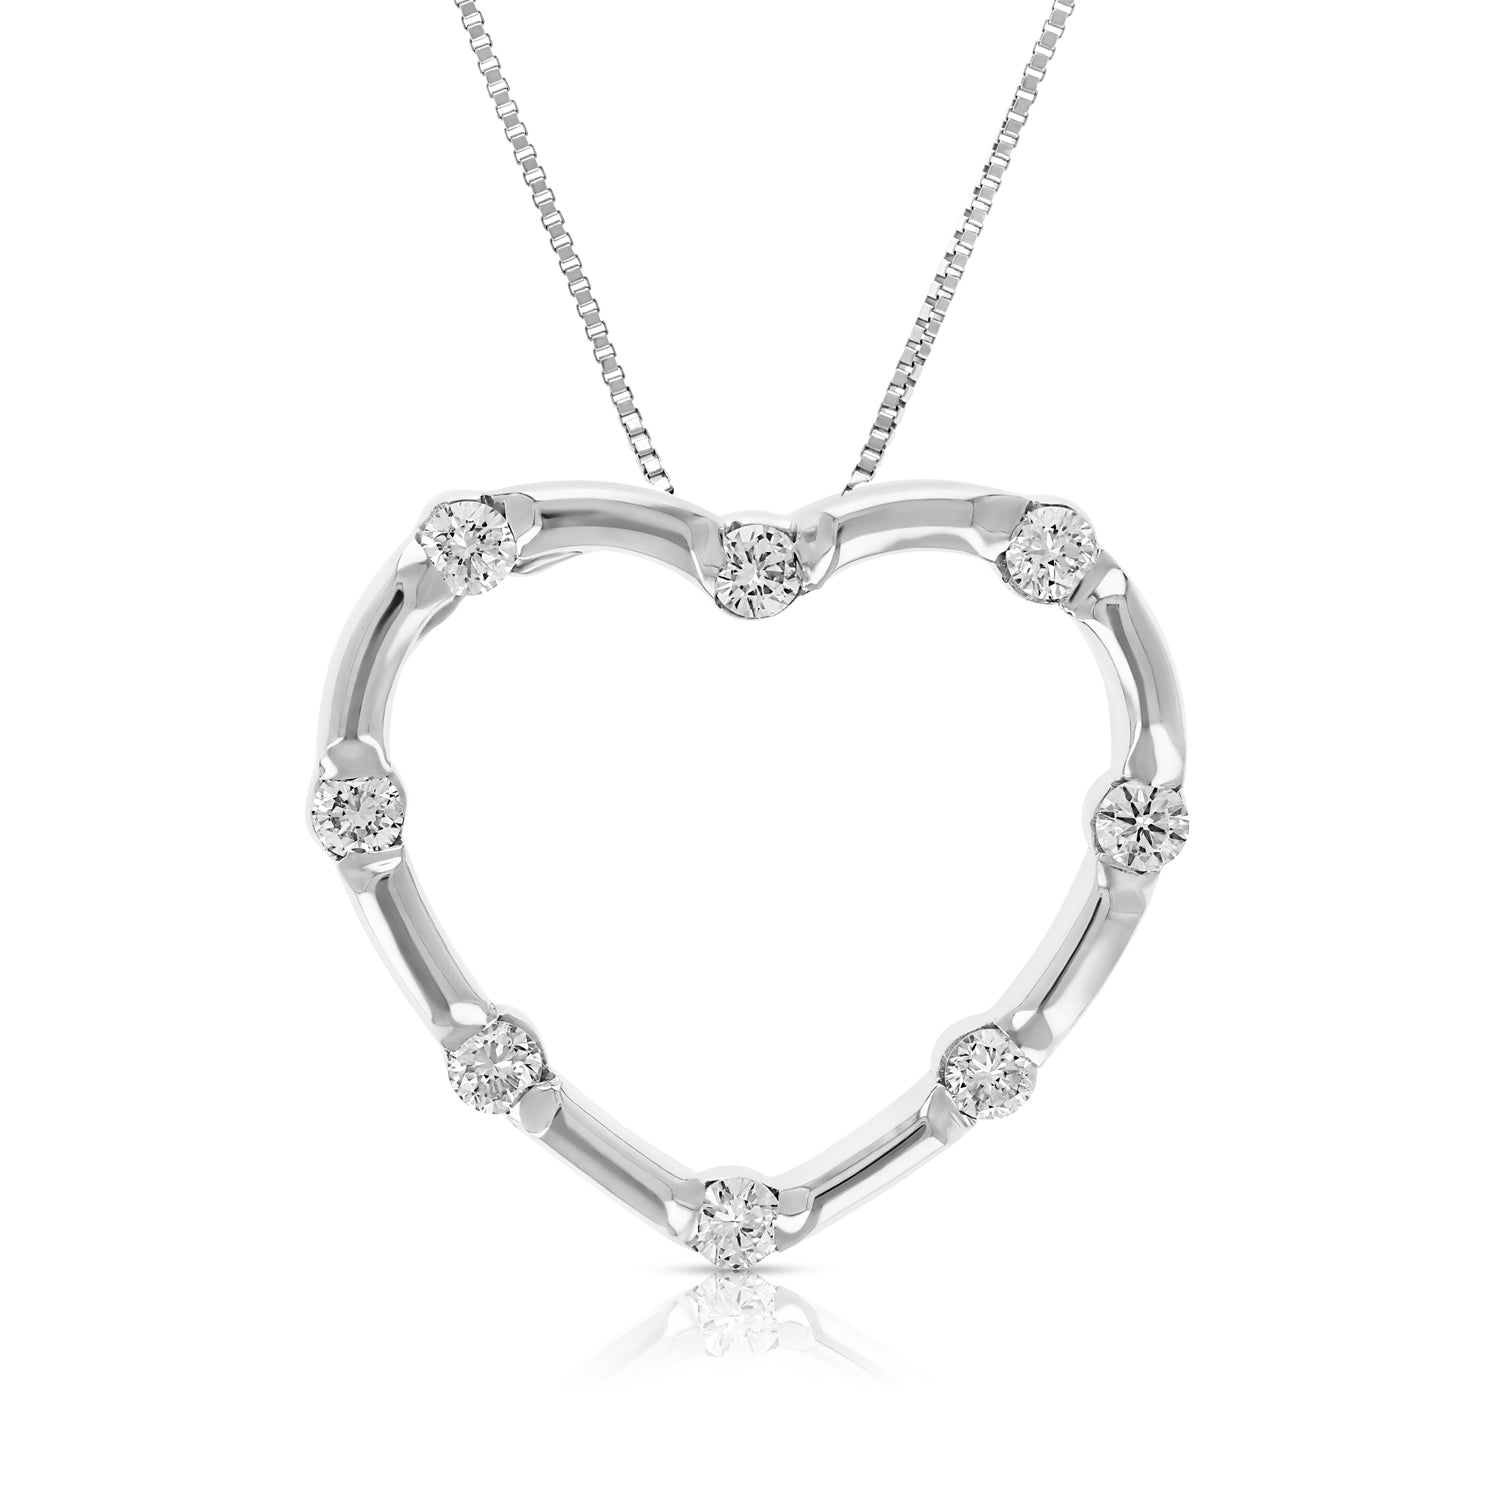 1/4 cttw Diamond Heart Pendant Necklace 10K White Gold with 18 Inch Chain